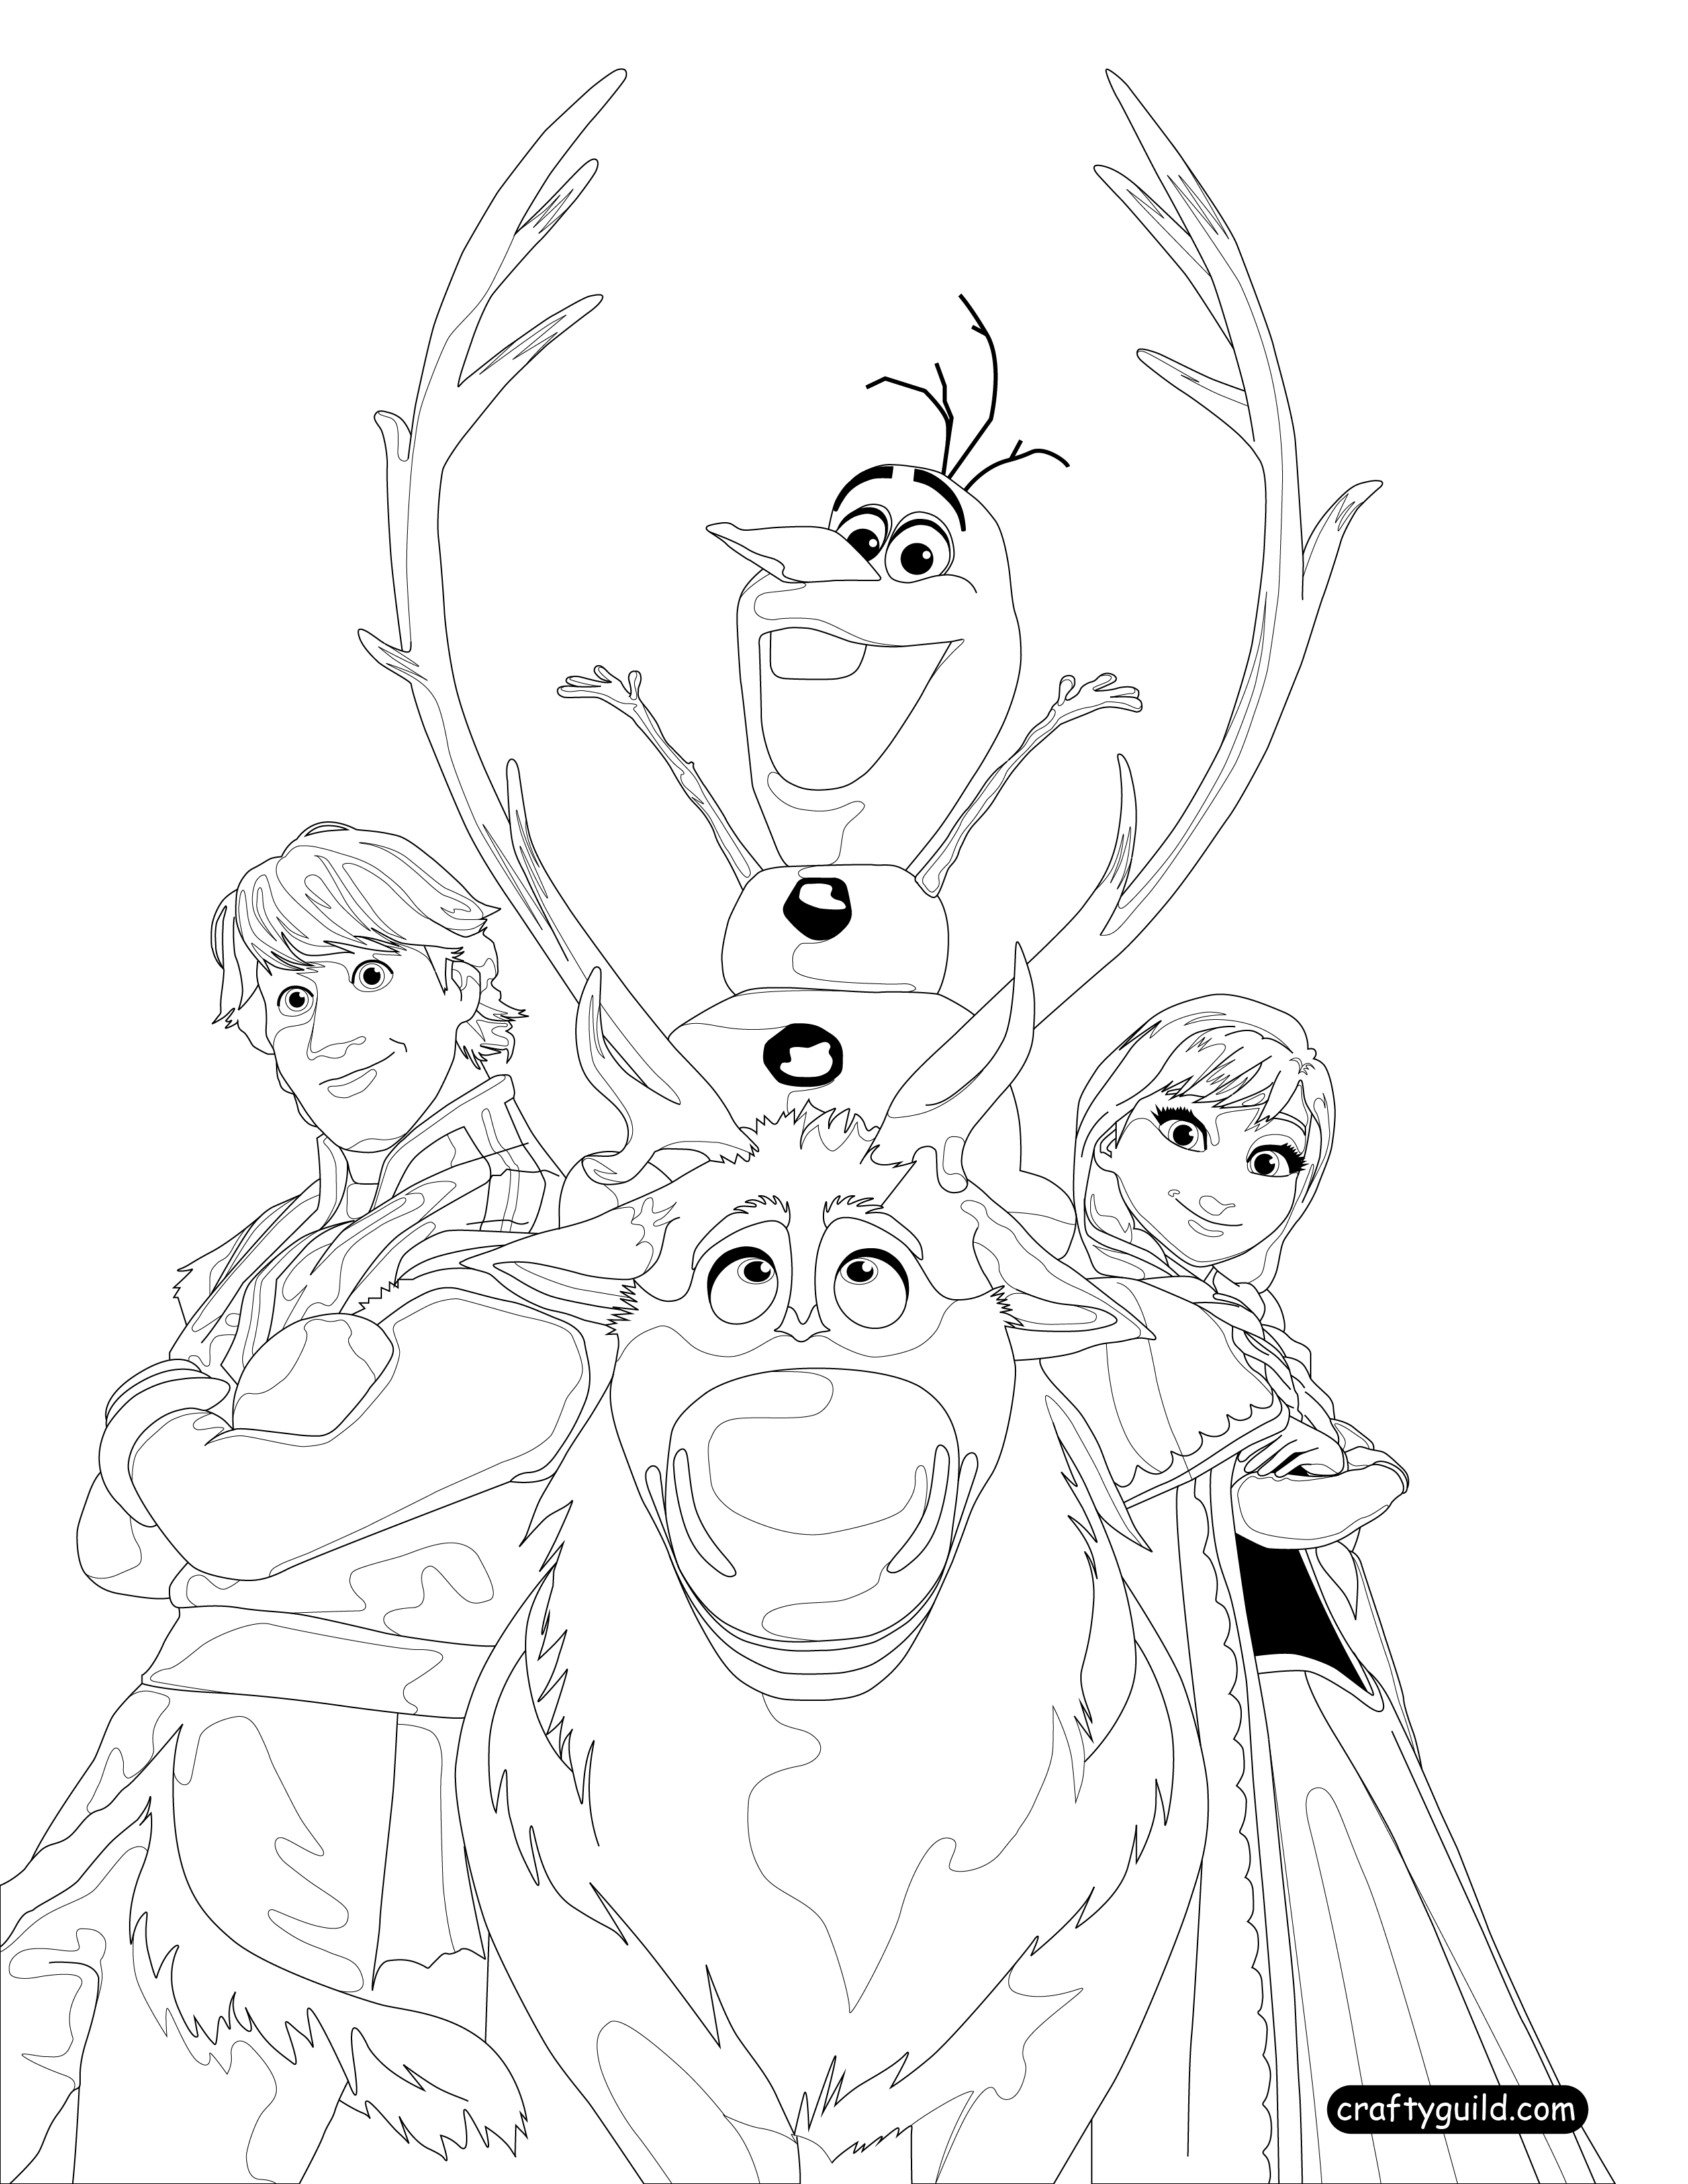 Drawing Frozen 71787 (Animation Movies) Printable coloring pages